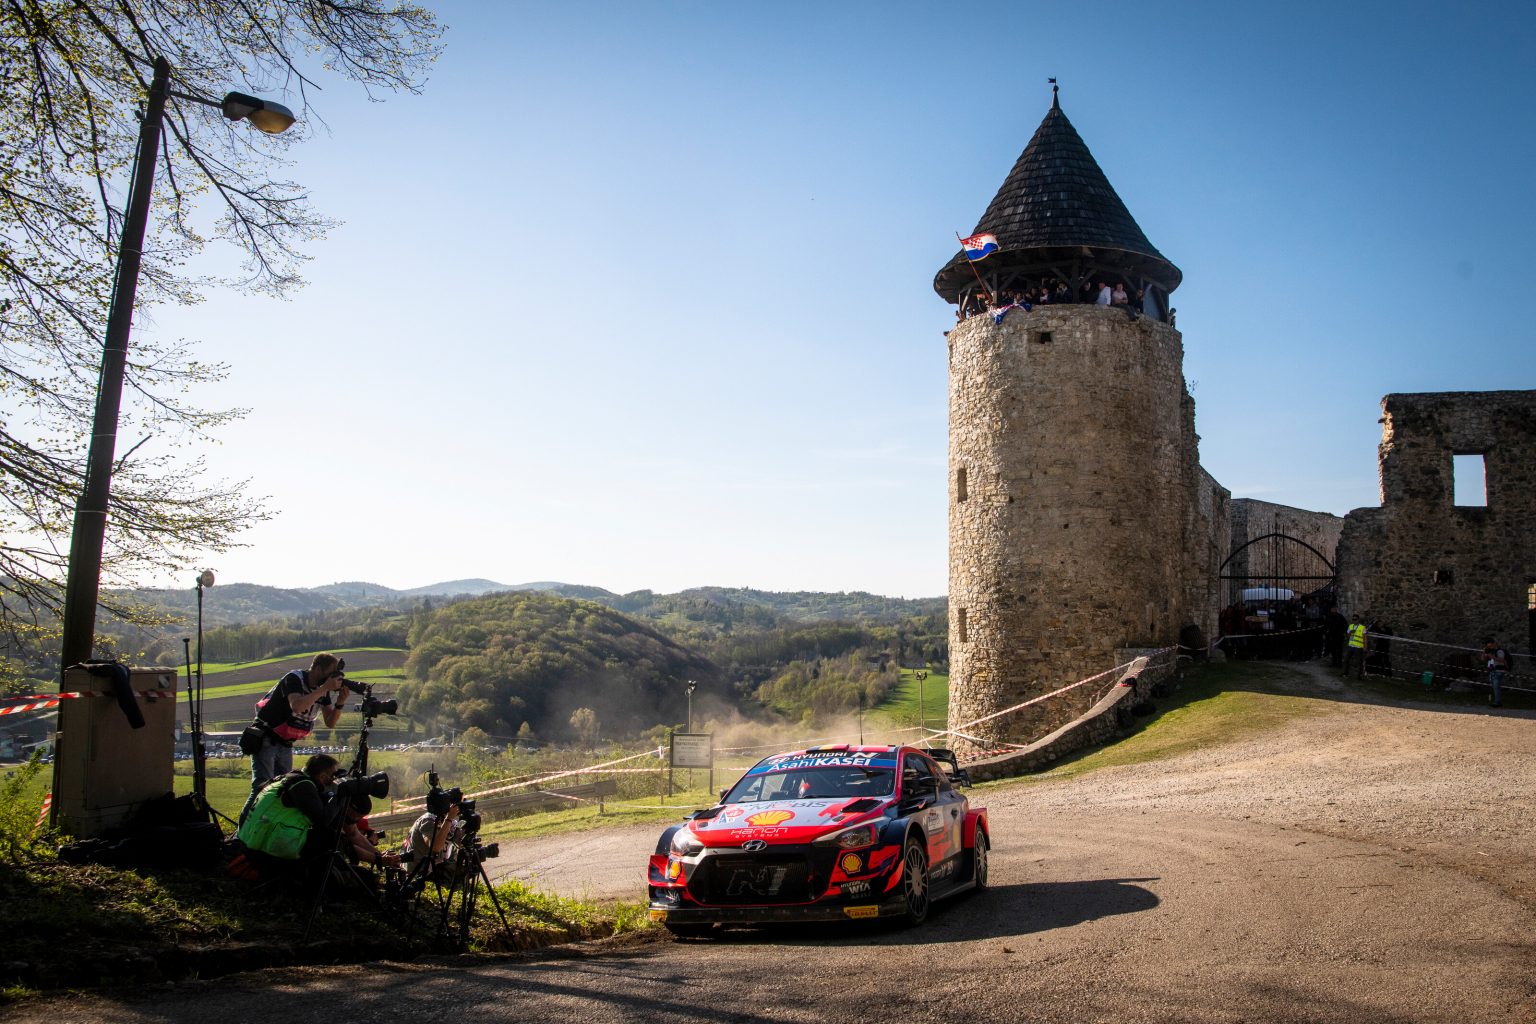 Thierry Neuville (BEL) and Martijn Wydaeghe (BEL) of Team Hyundai Shell Mobis perform during World Rally Championship Croatia in Zagreb, Croatia on April 24, 2021 // Jaanus Ree/Red Bull Content Pool // SI202104240176 // Usage for editorial use only //